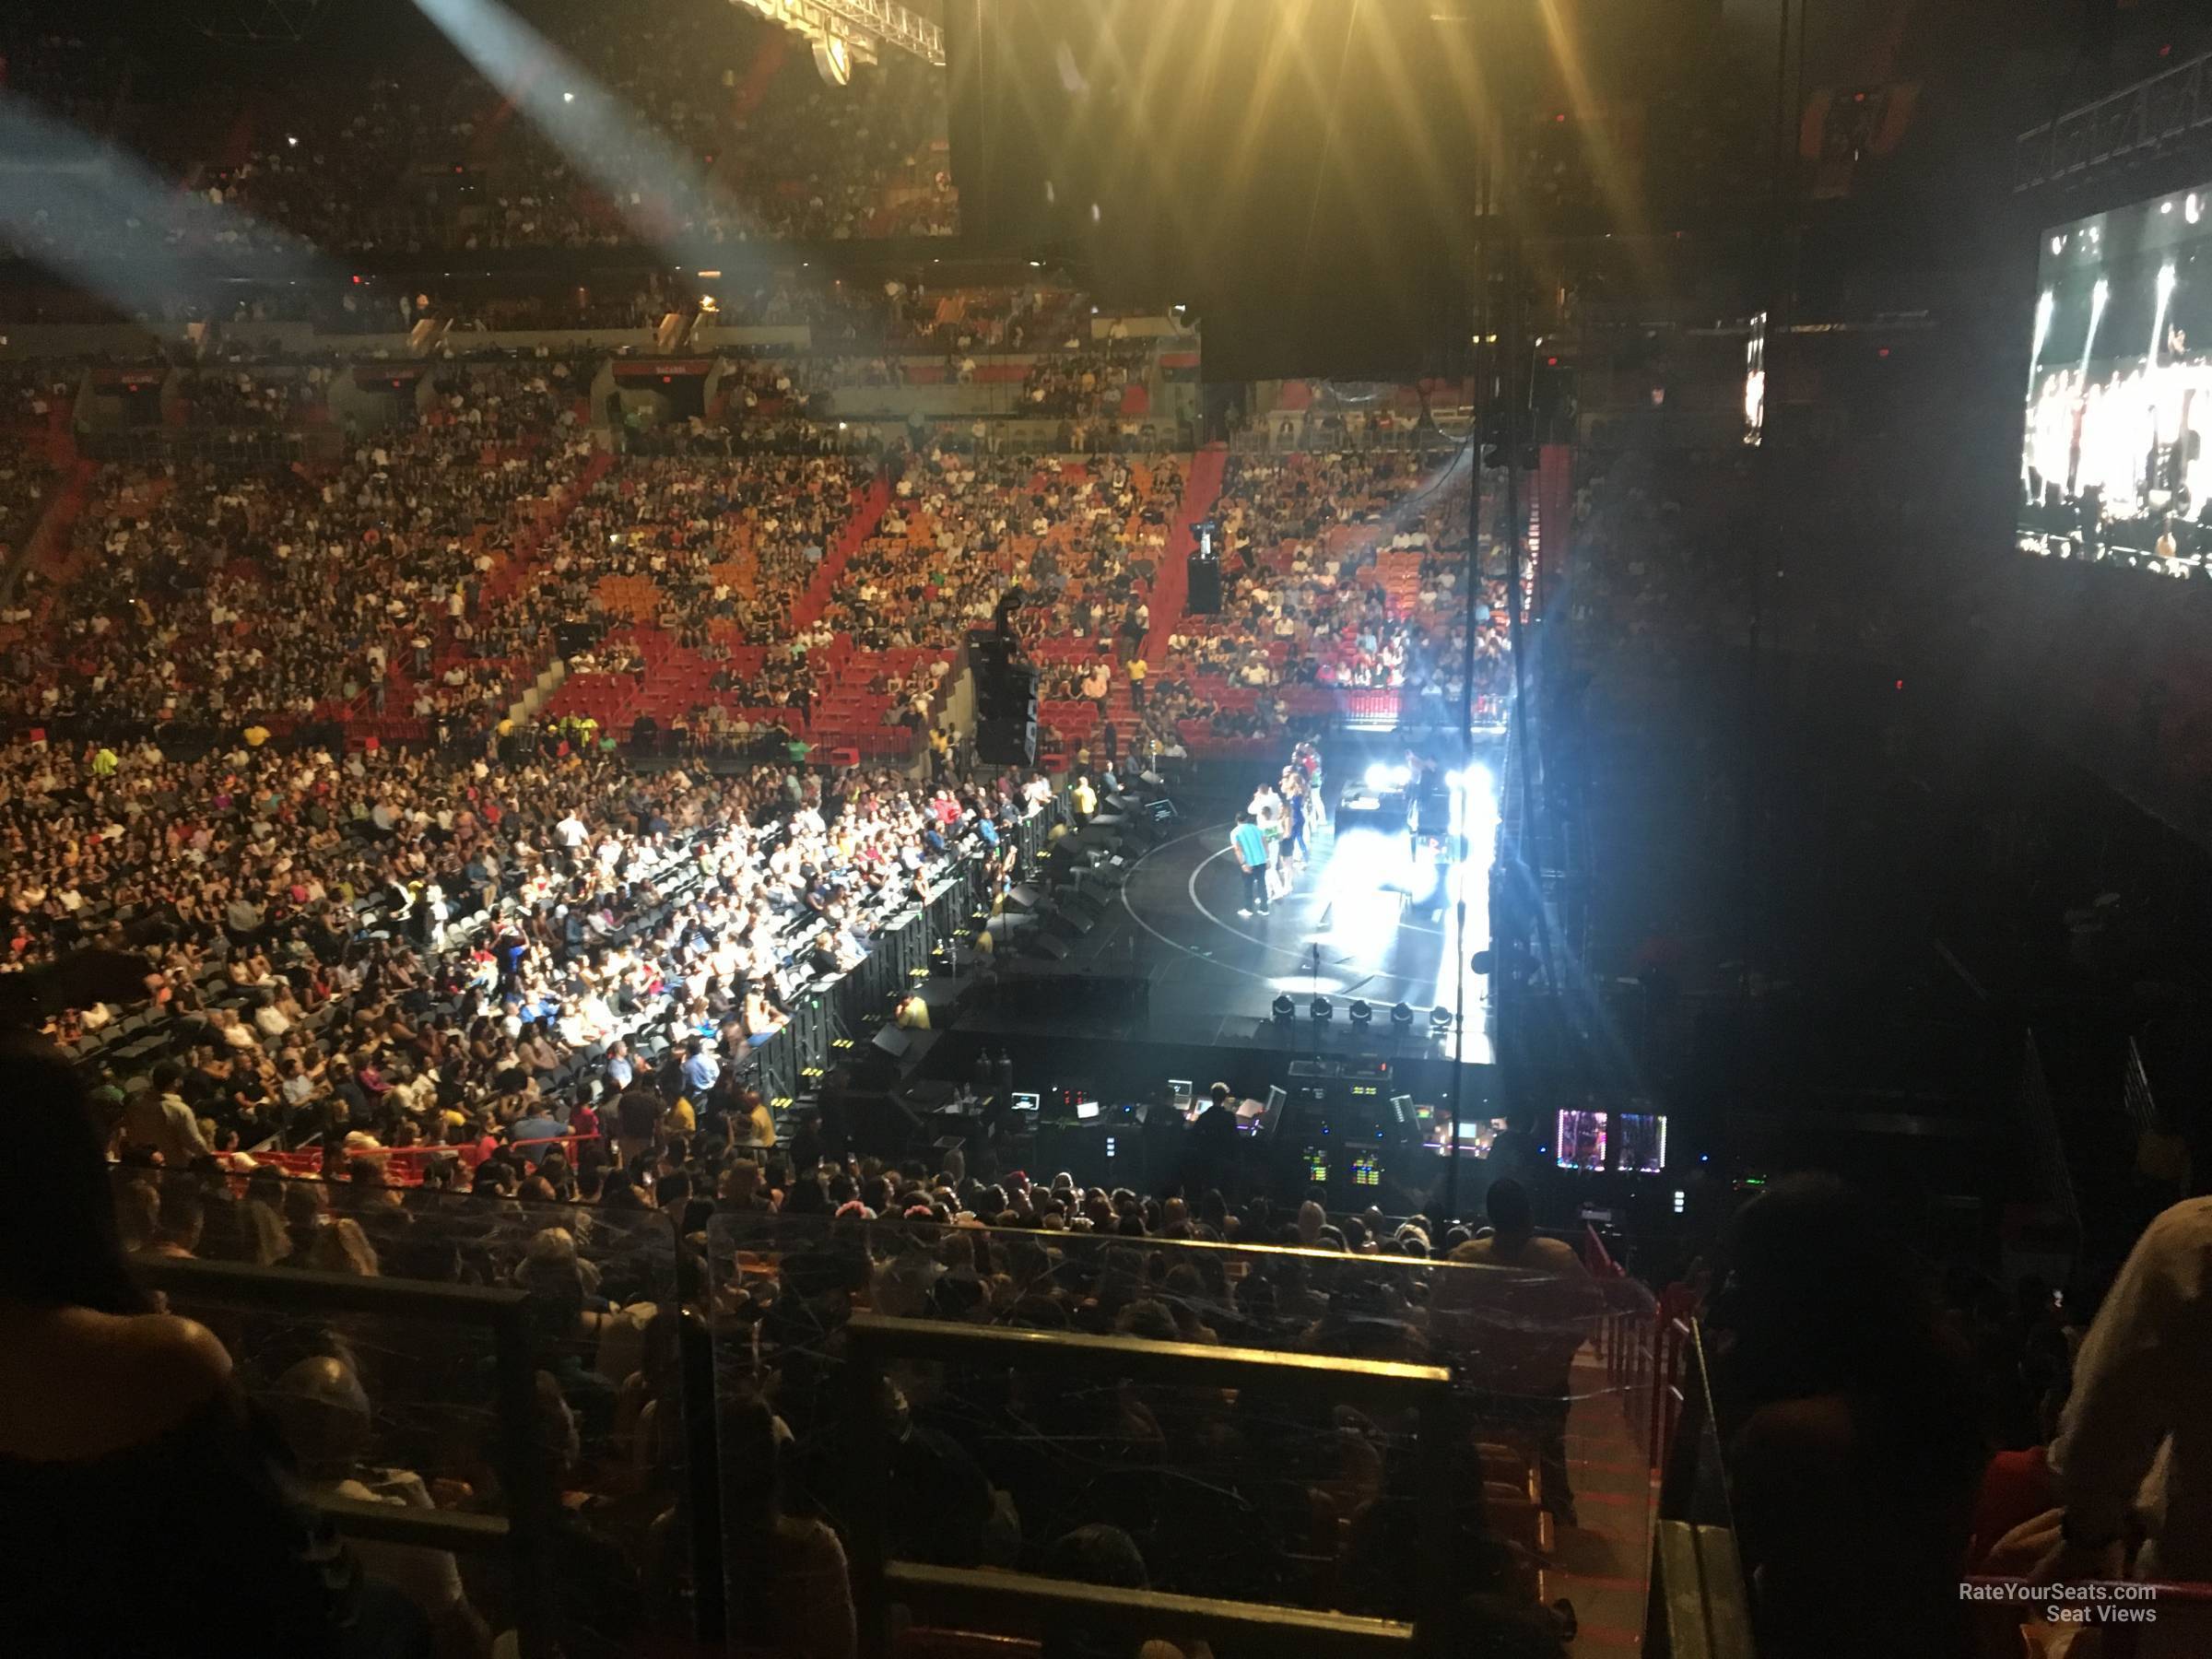 section 105, row 29 seat view  for concert - ftx arena